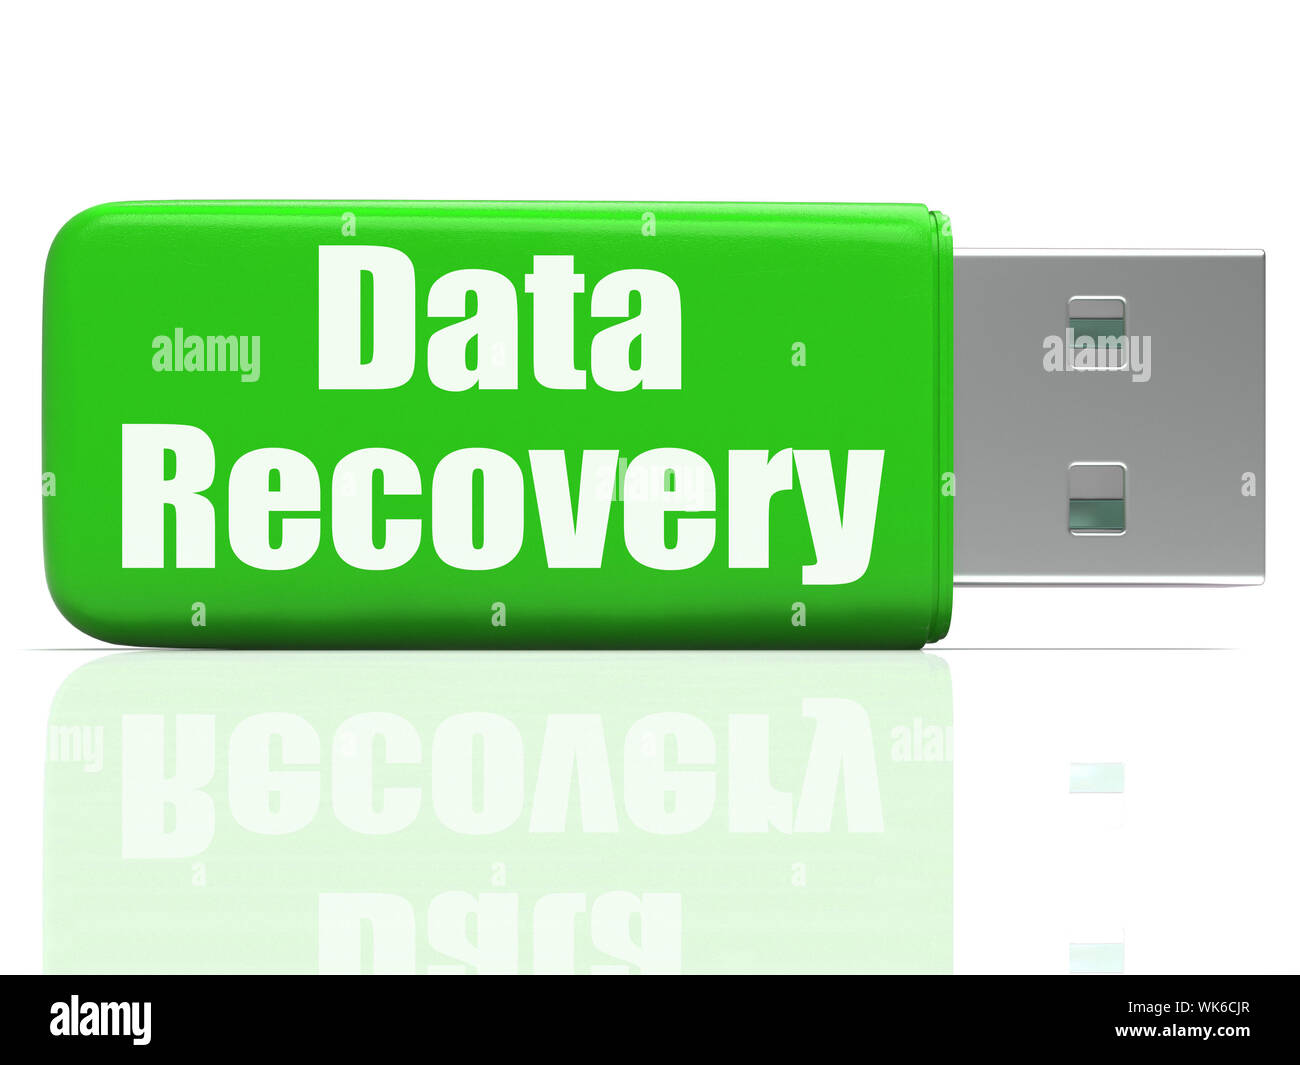 Data Recovery Pen drive Meaning Safe Files Transfer Or Data ...